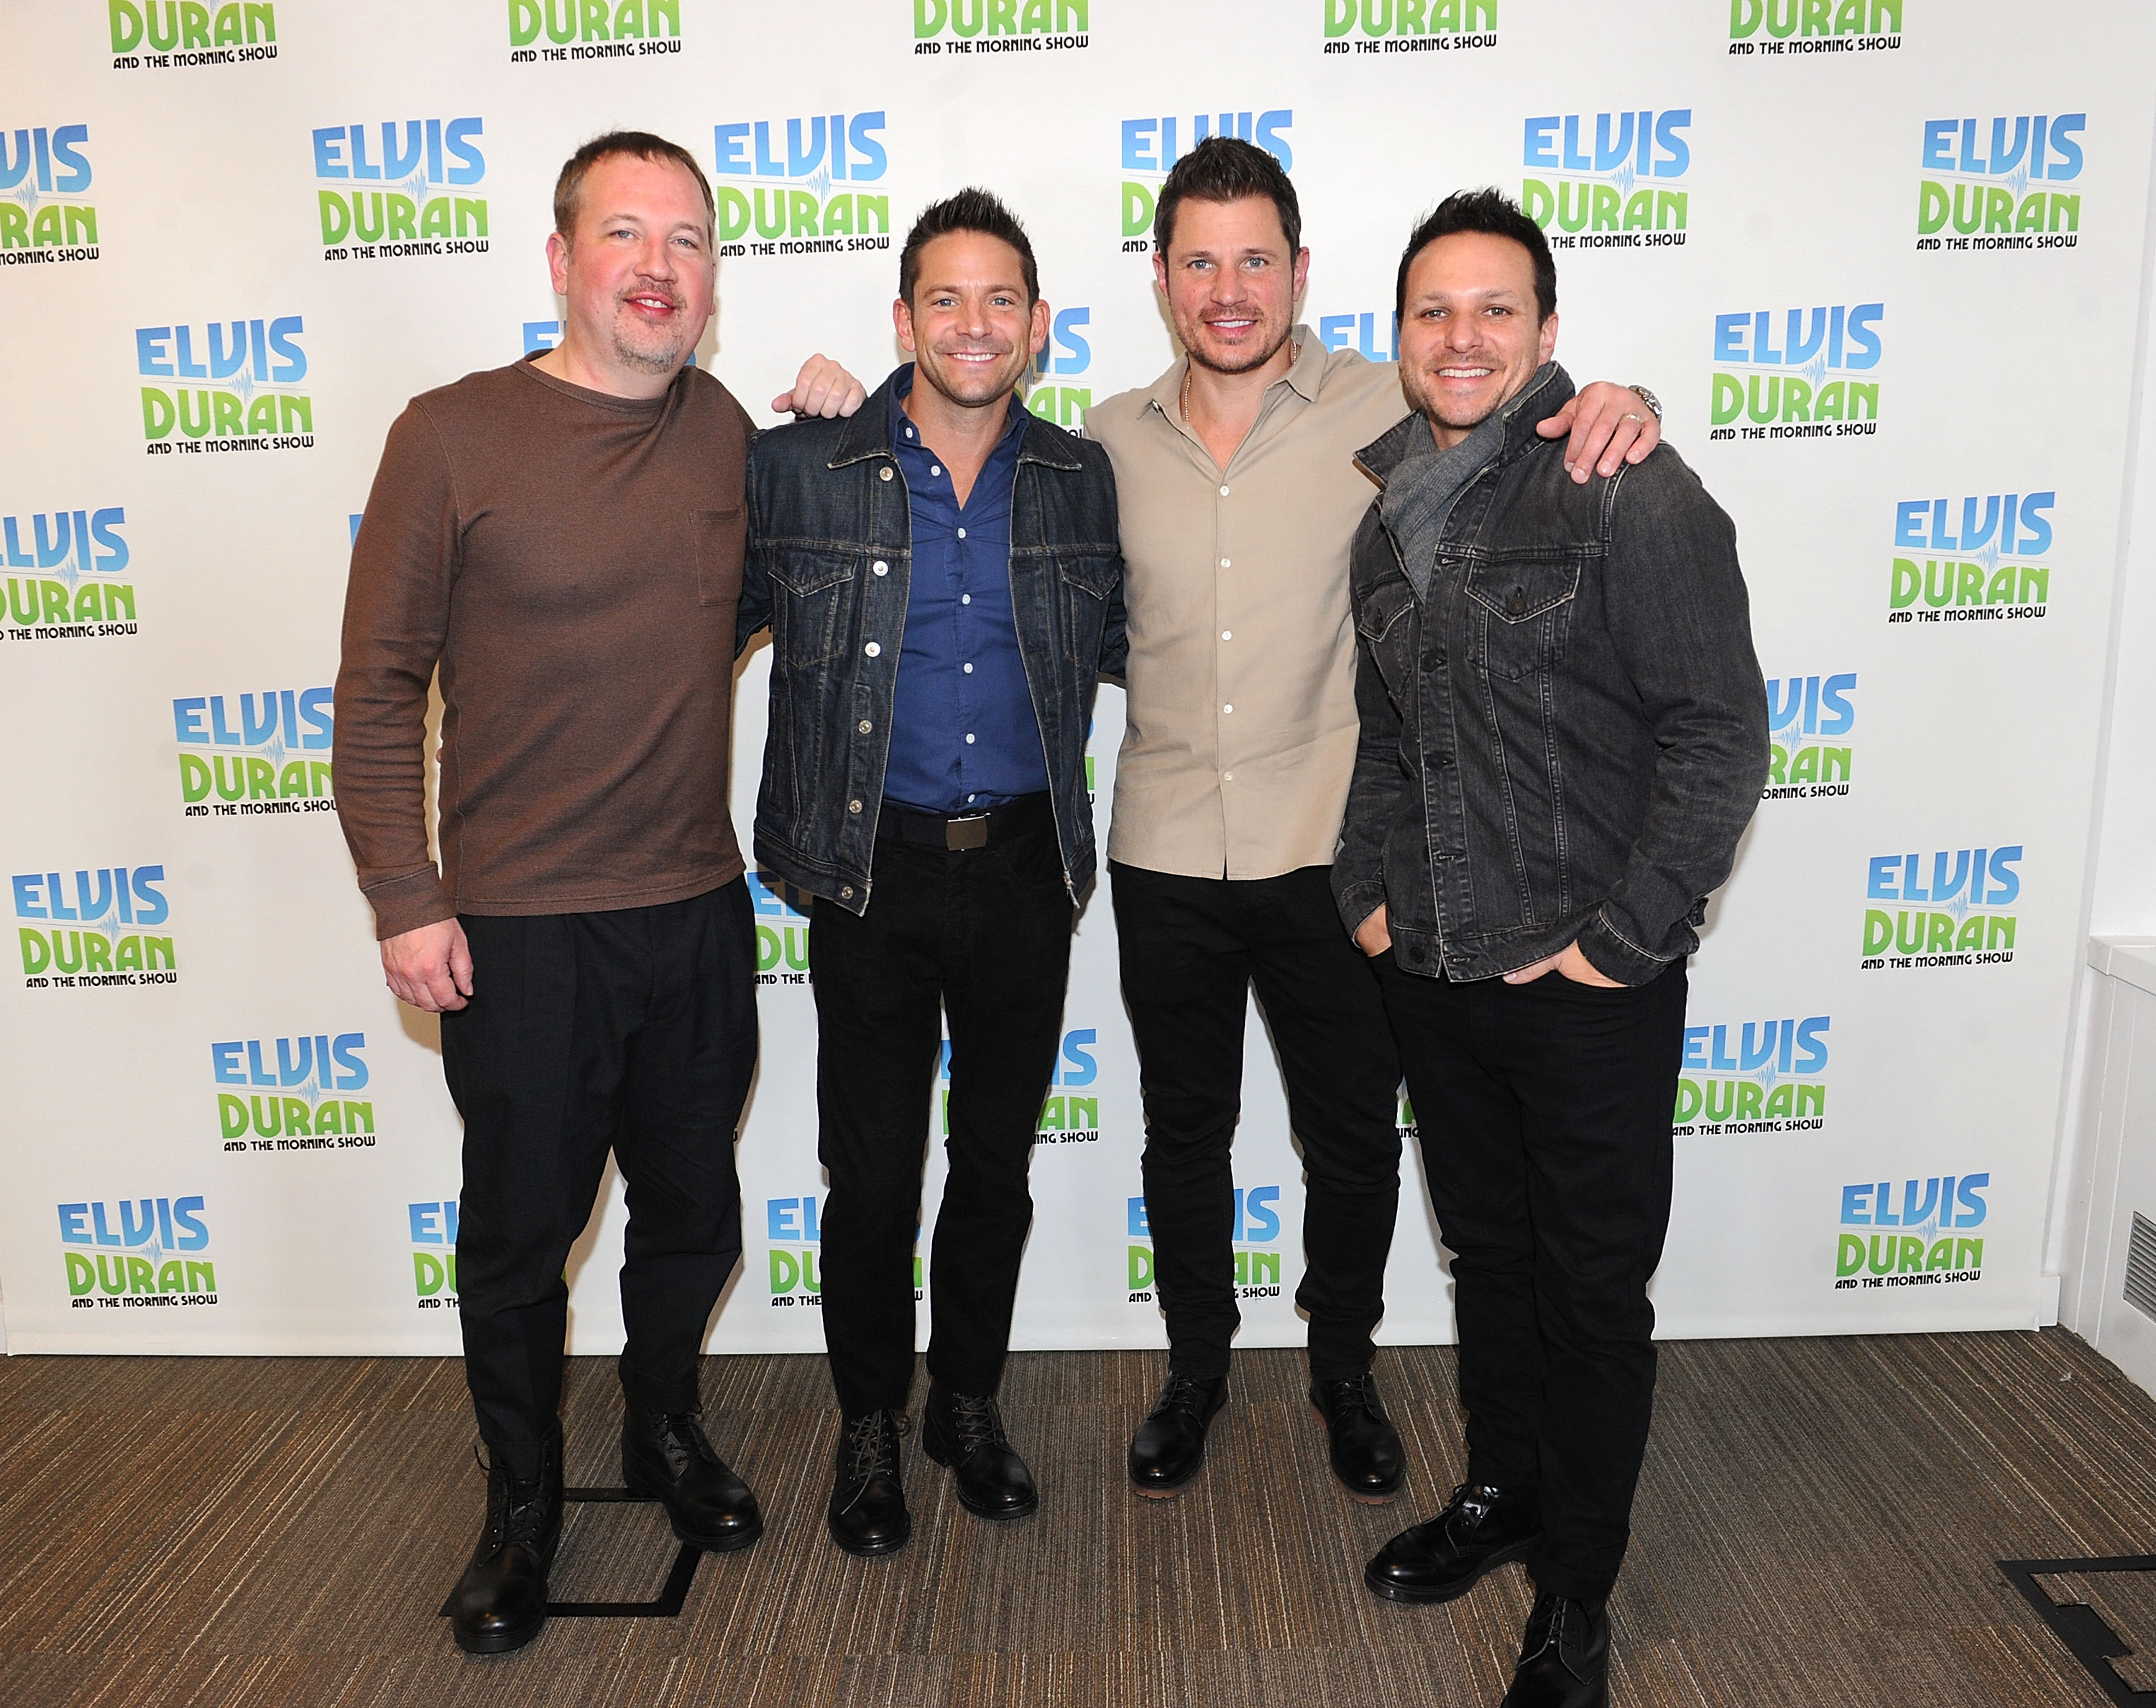 98 Degrees Now: The Boy Band Opens up About Life in Their 40s